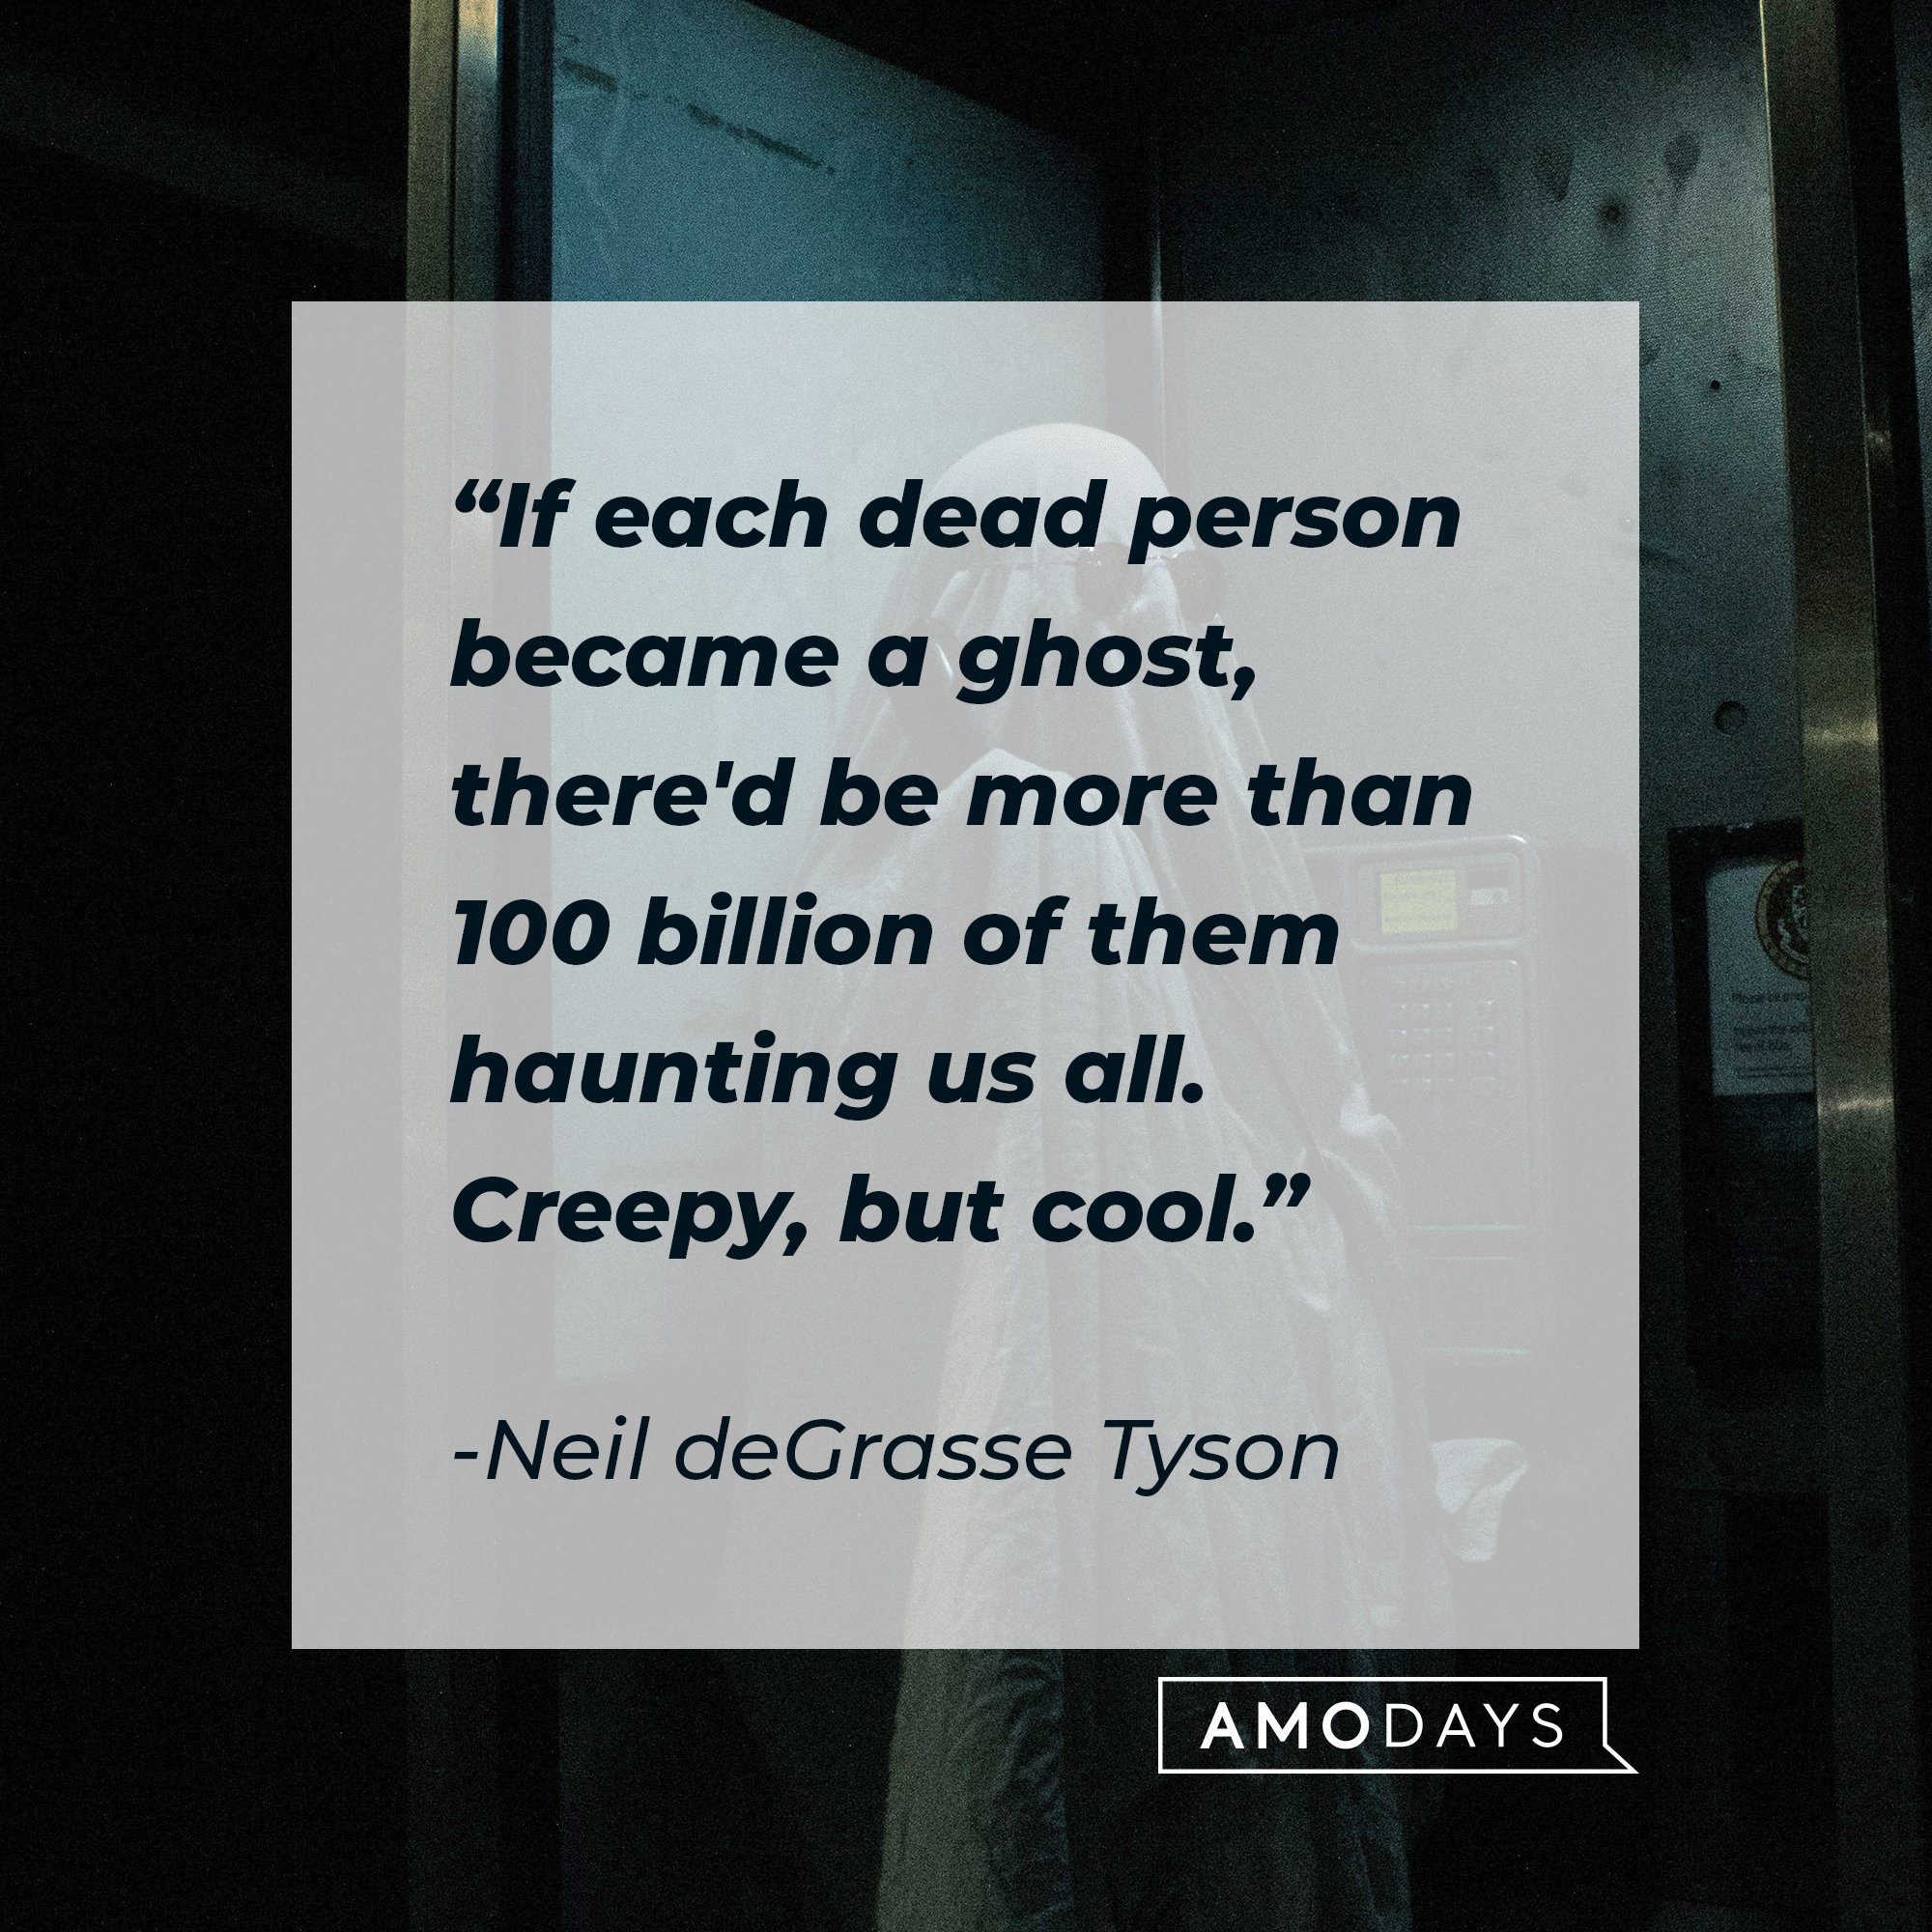 Neil deGrasse Tyson’s quote: "If each dead person became a ghost, there'd be more than 100 billion of them haunting us all. Creepy, but cool." | Image: AmoDays 